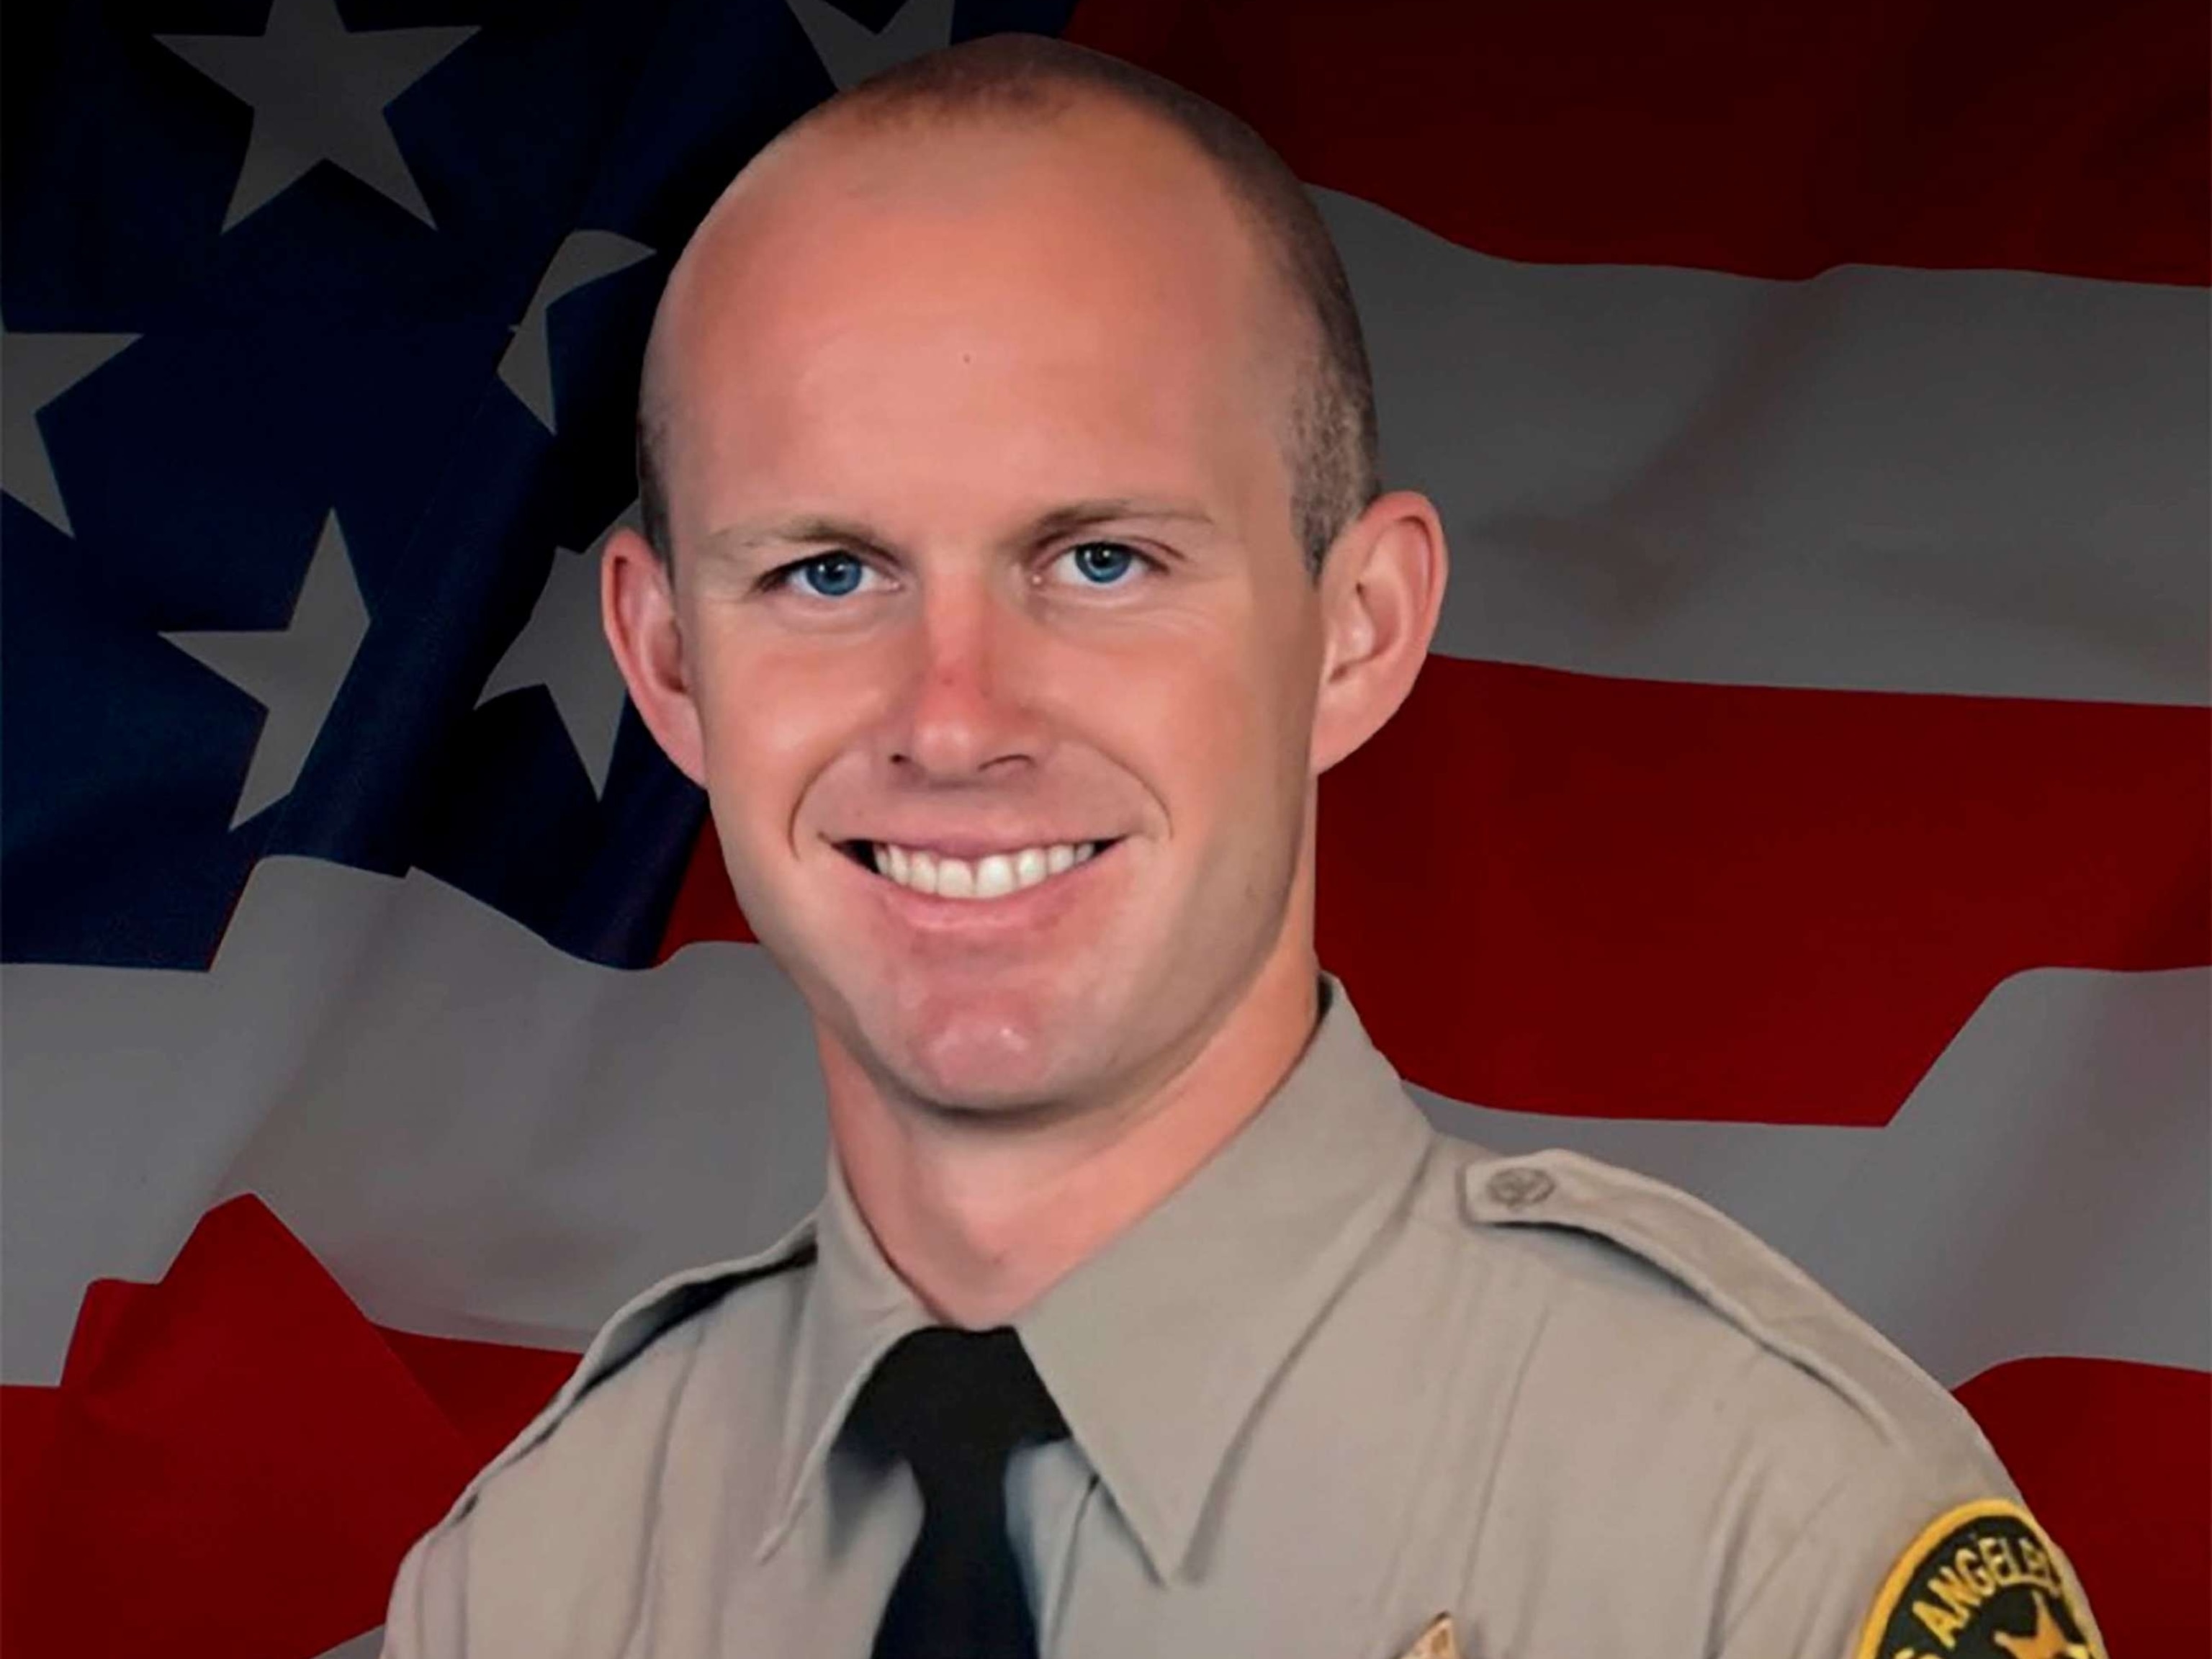 PHOTO: This undated photo provided by Los Angeles County Sheriffs Department shows its Deputy Ryan Clinkunbroomer.